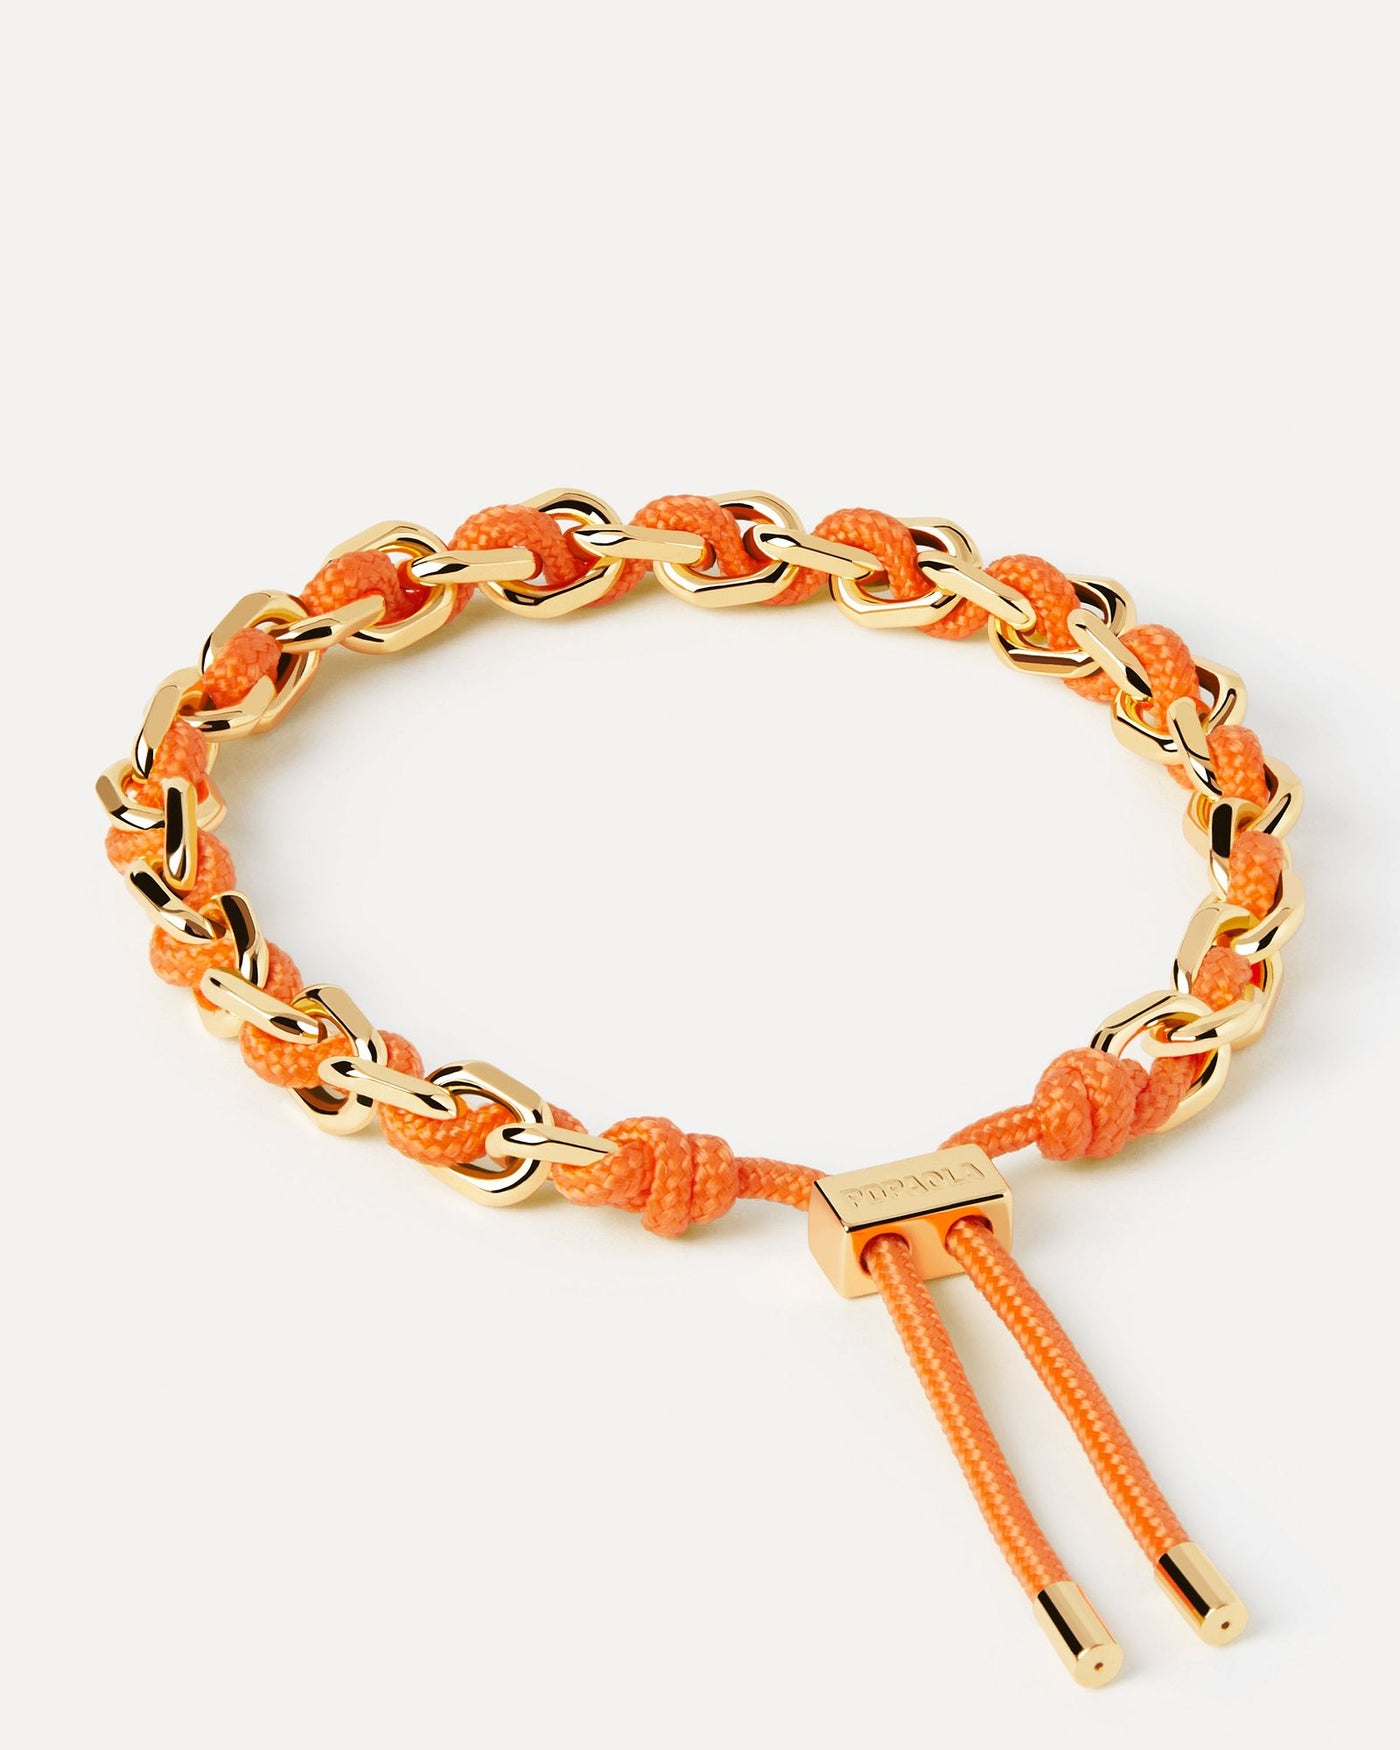 2024 Selection | Tangerine Rope and Chain Bracelet. Golden chain bracelet with an orange rope adjustable sliding clasp. Get the latest arrival from PDPAOLA. Place your order safely and get this Best Seller. Free Shipping.